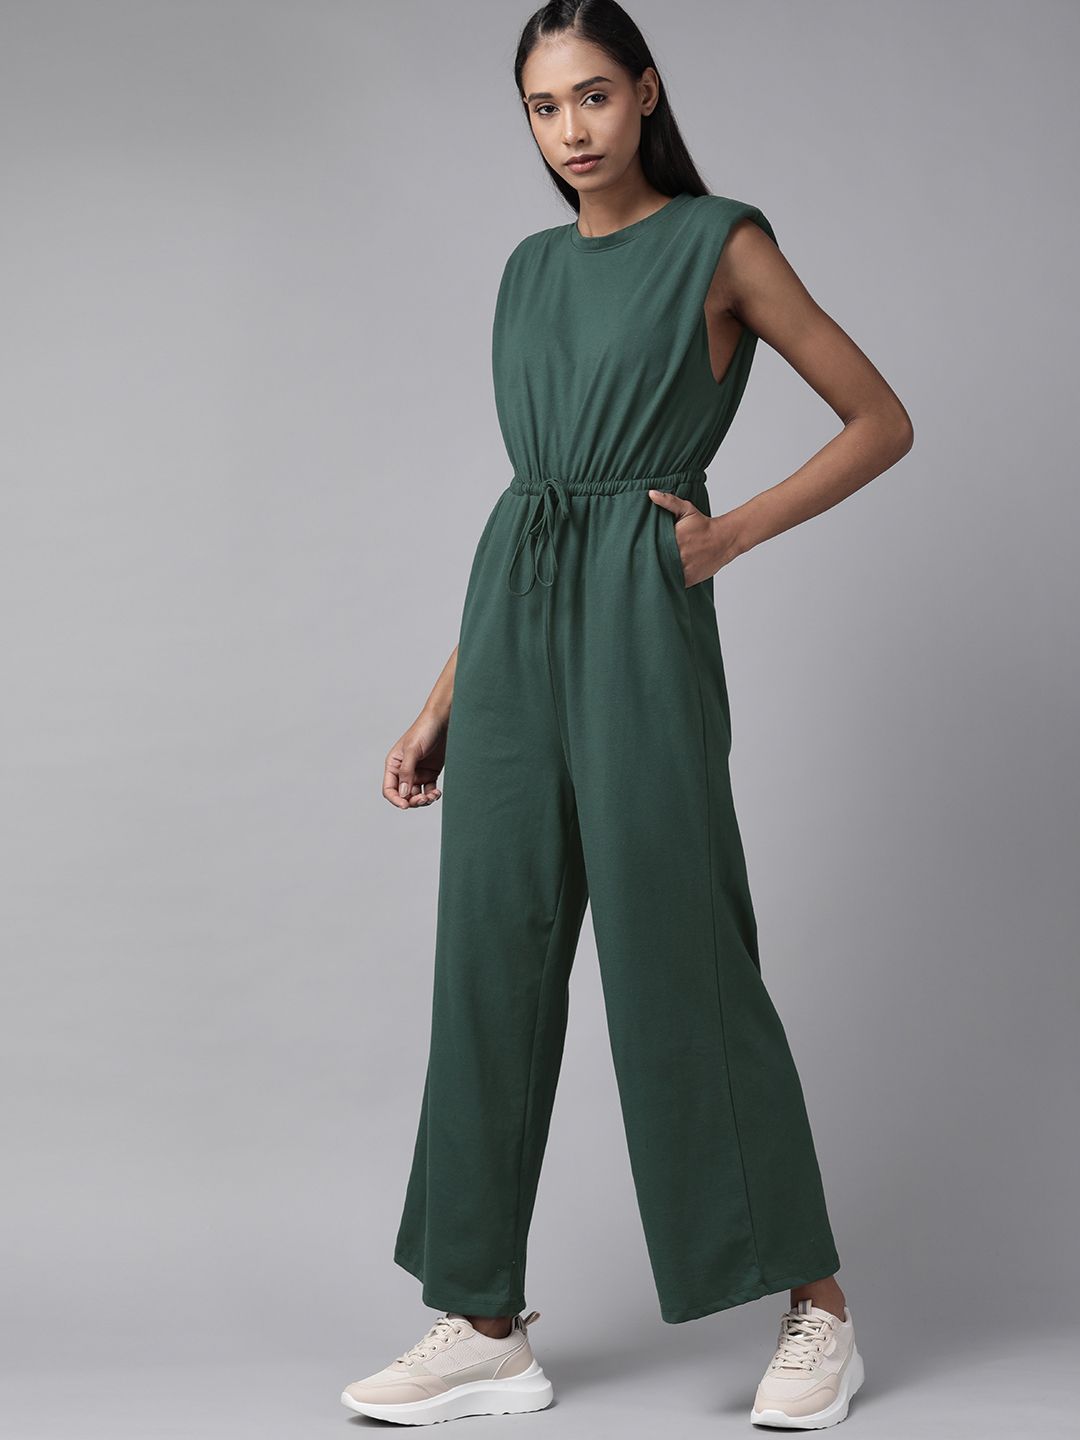 Roadster Green Basic Jumpsuit Price in India